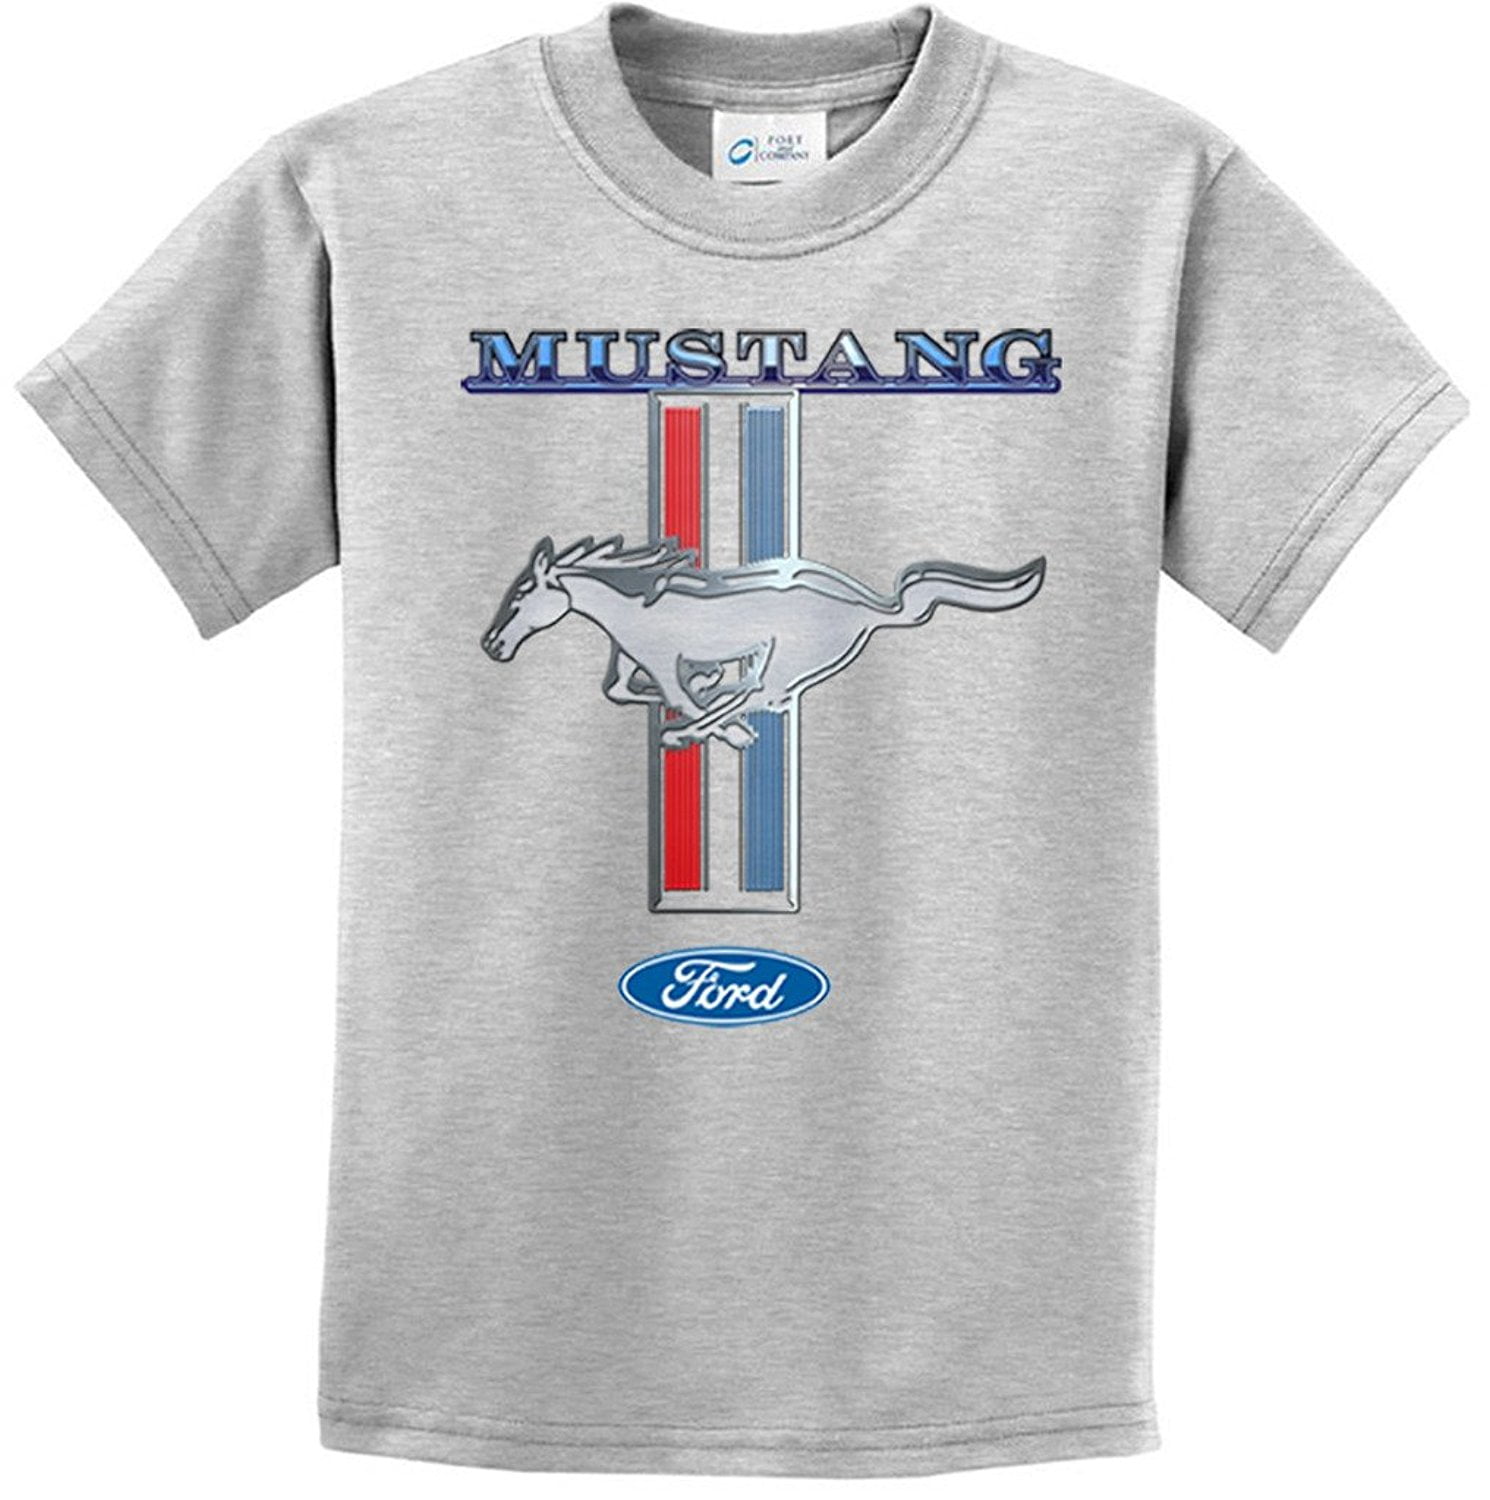 FORD MUSTANG STANG STRIPES Toddler Kids Graphic Tee Shirt 2T 3T 4T 4 5-6 7